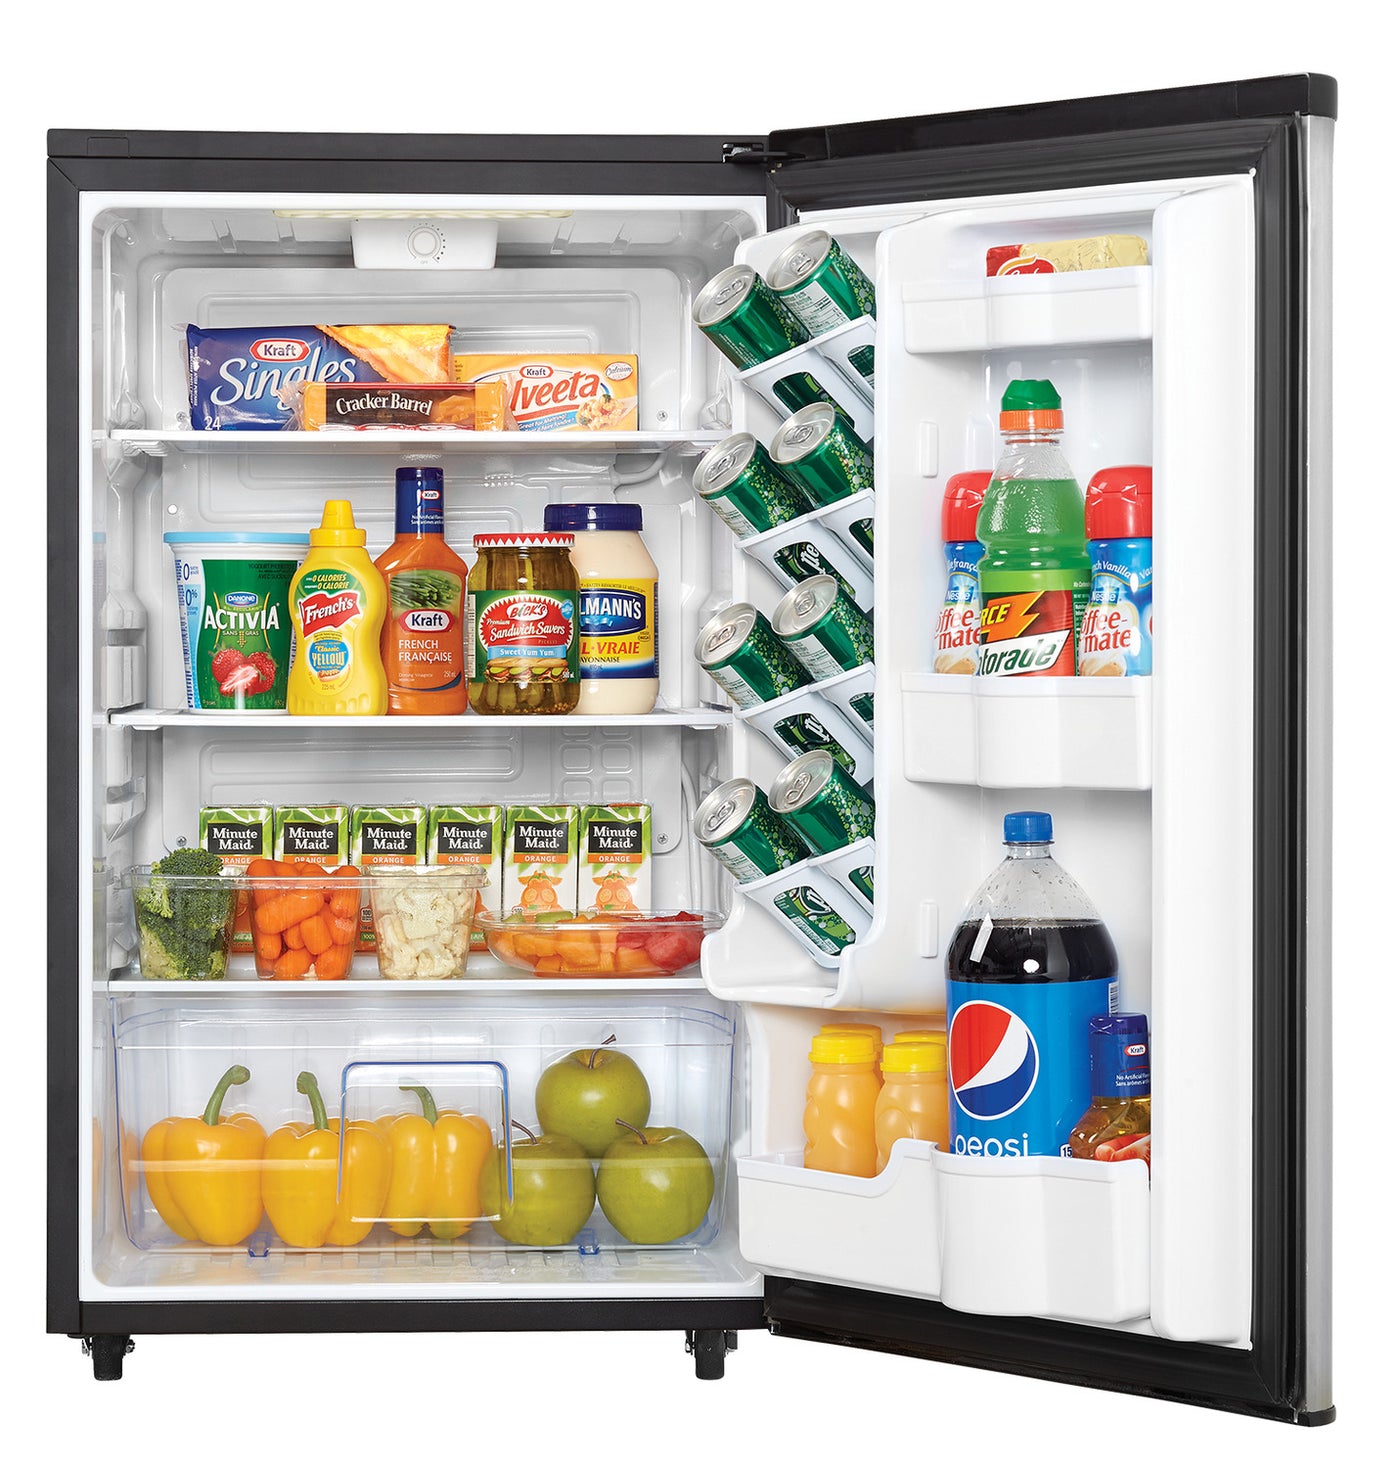 Danby Stainless Steel Outdoor Compact Refrigerator (4.4 Cu. Ft.) - DAR044A6BSLDBO